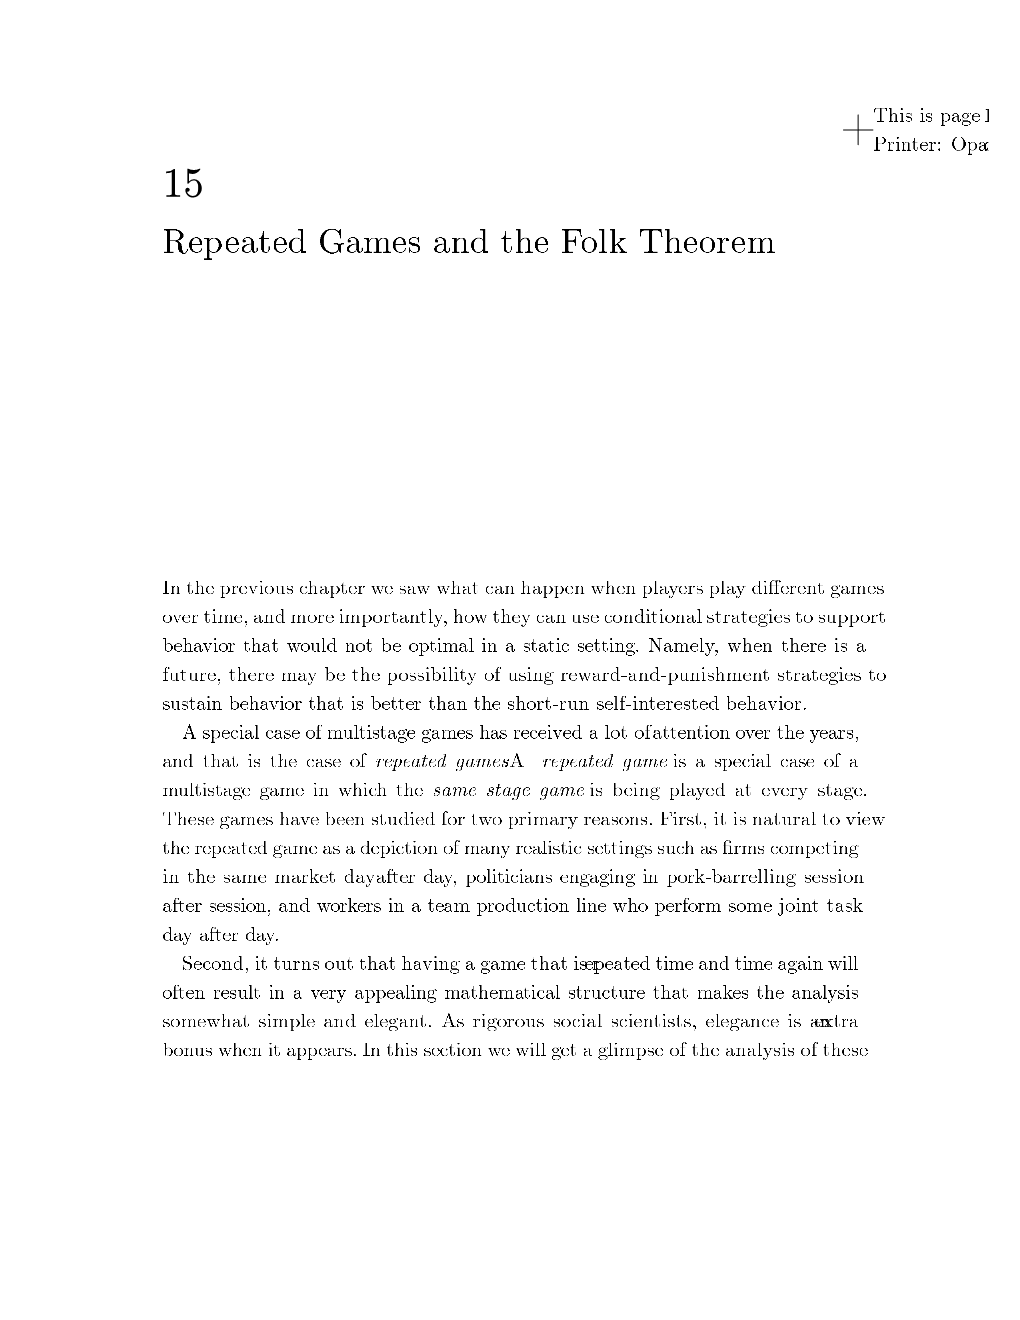 Repeated Games and the Folk Theorem